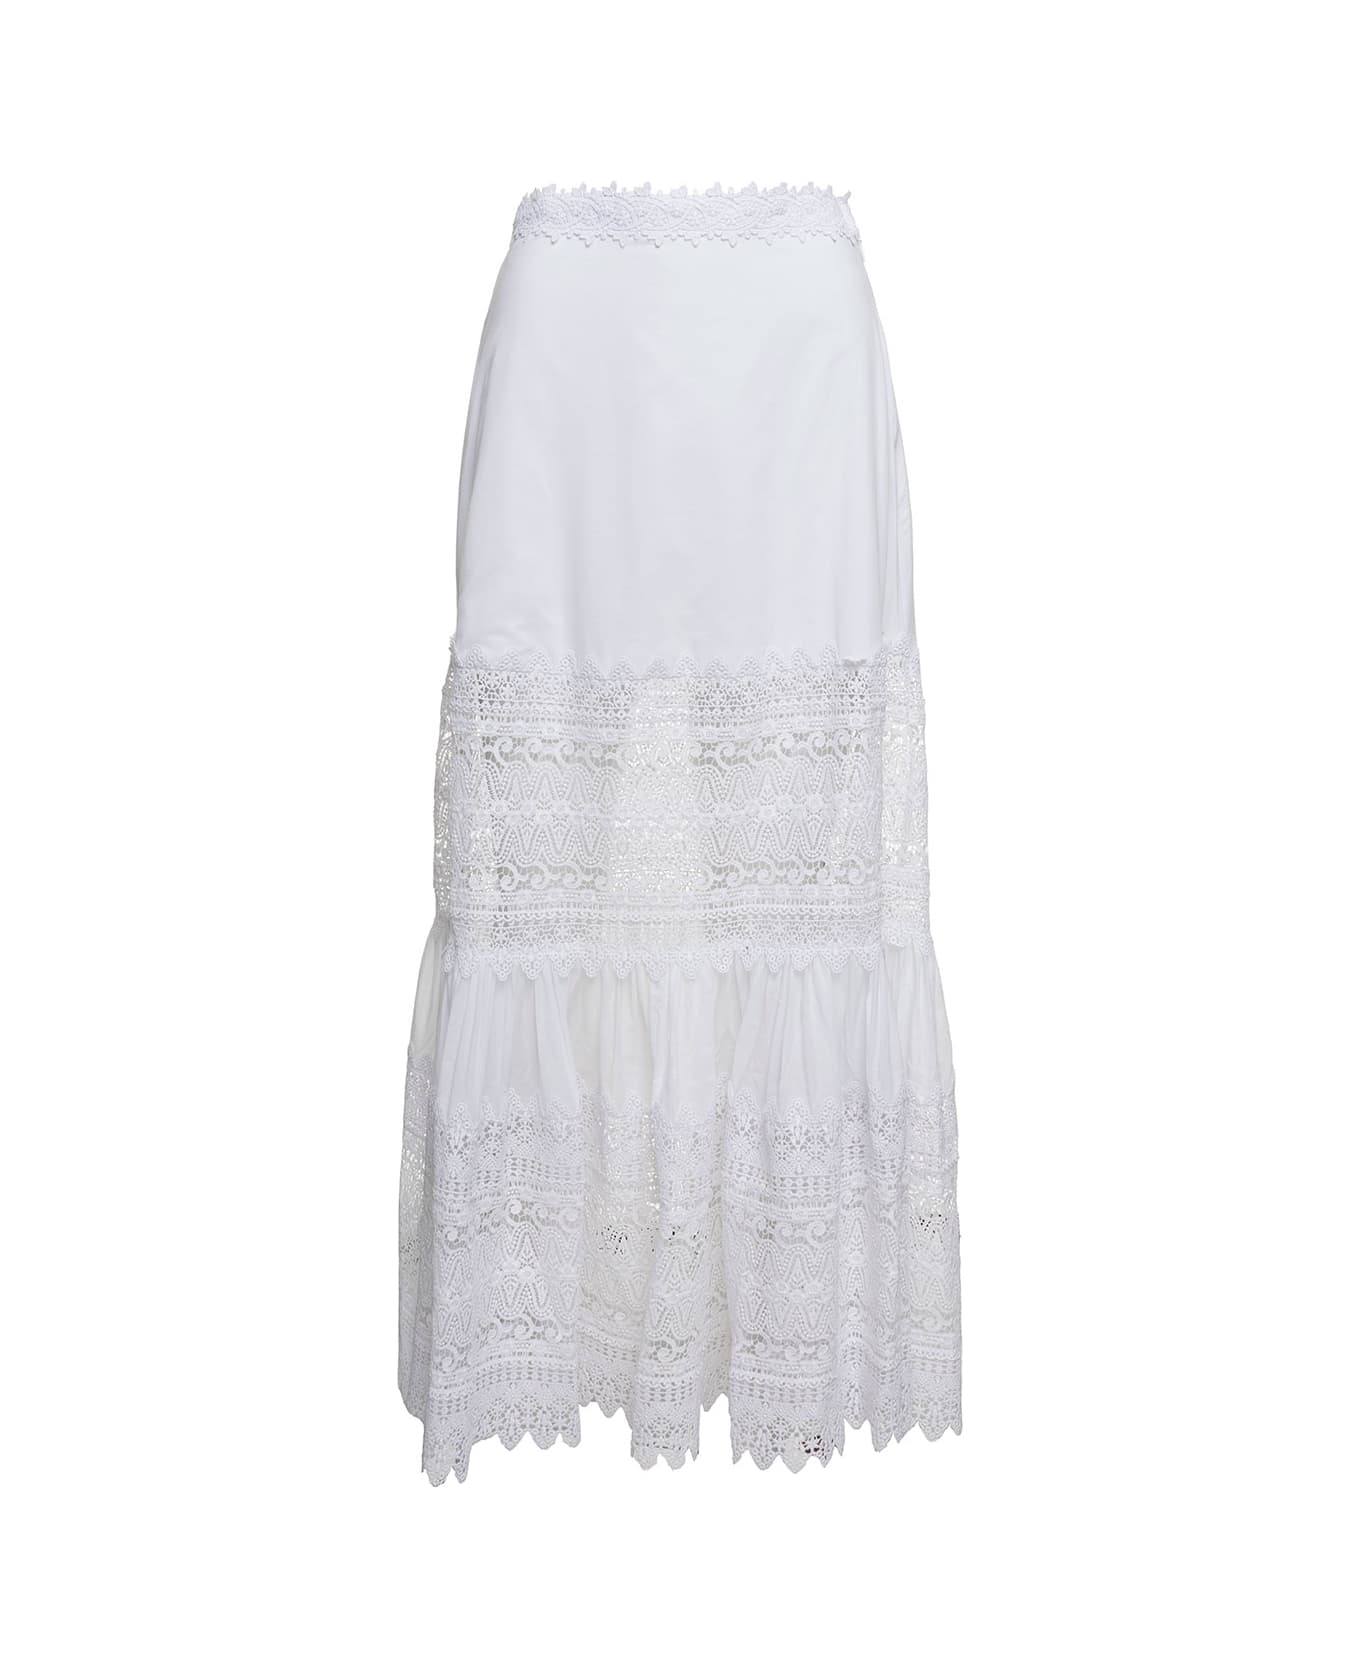 Charo Ruiz 'viola' White Flounced Skirt With Lace Inserts In Cotton Blend Woman - White スカート